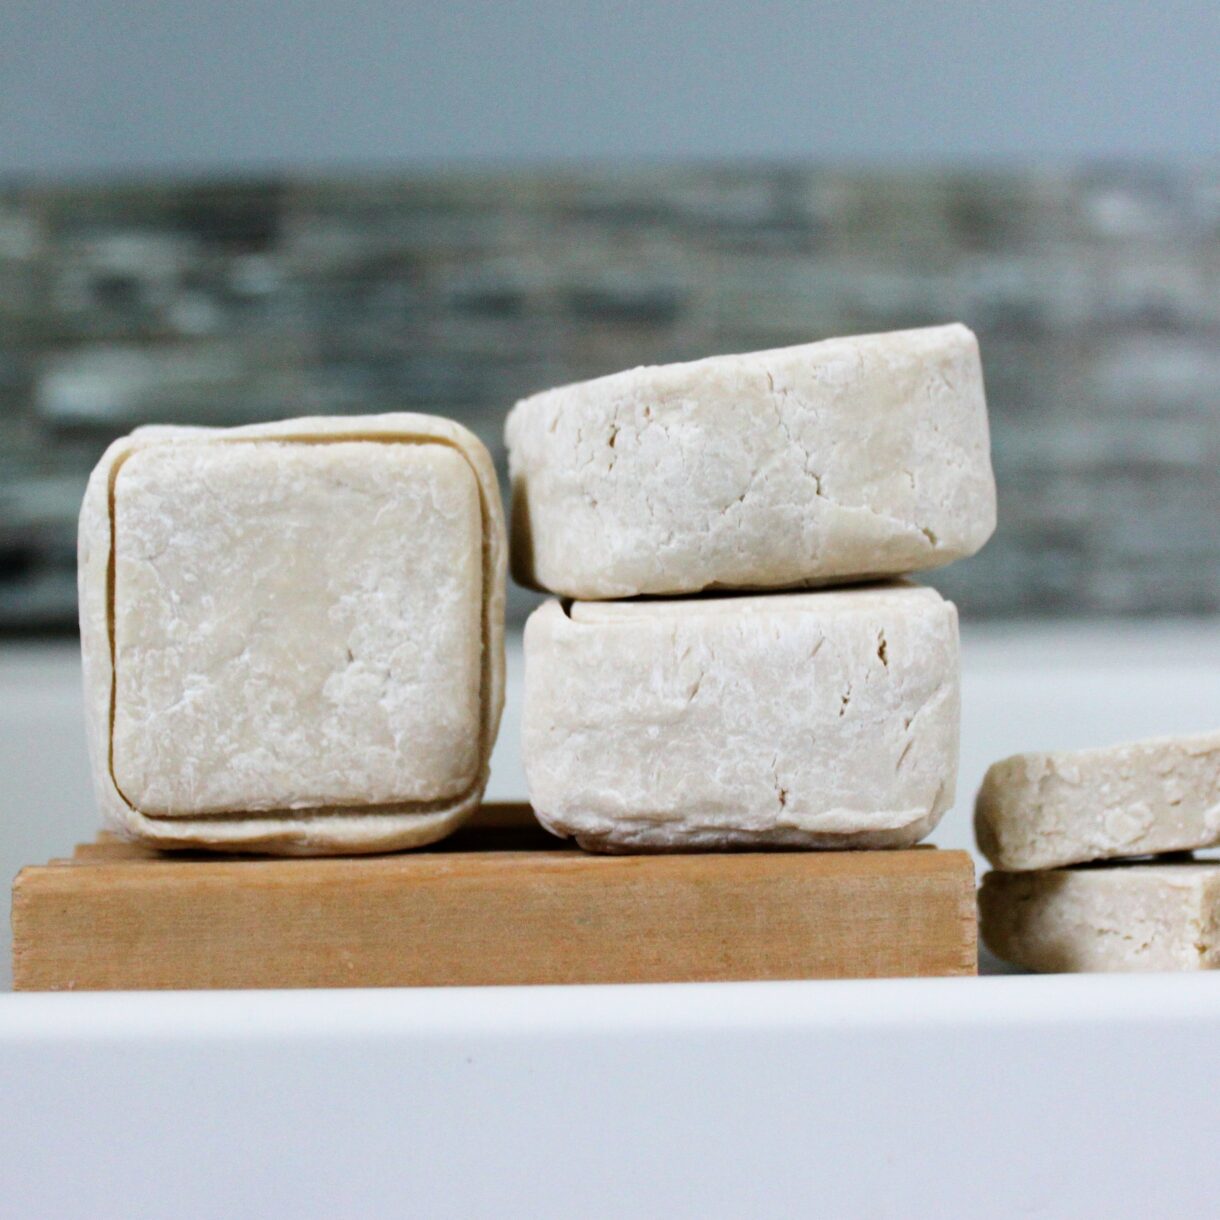 Small face cleansing bars